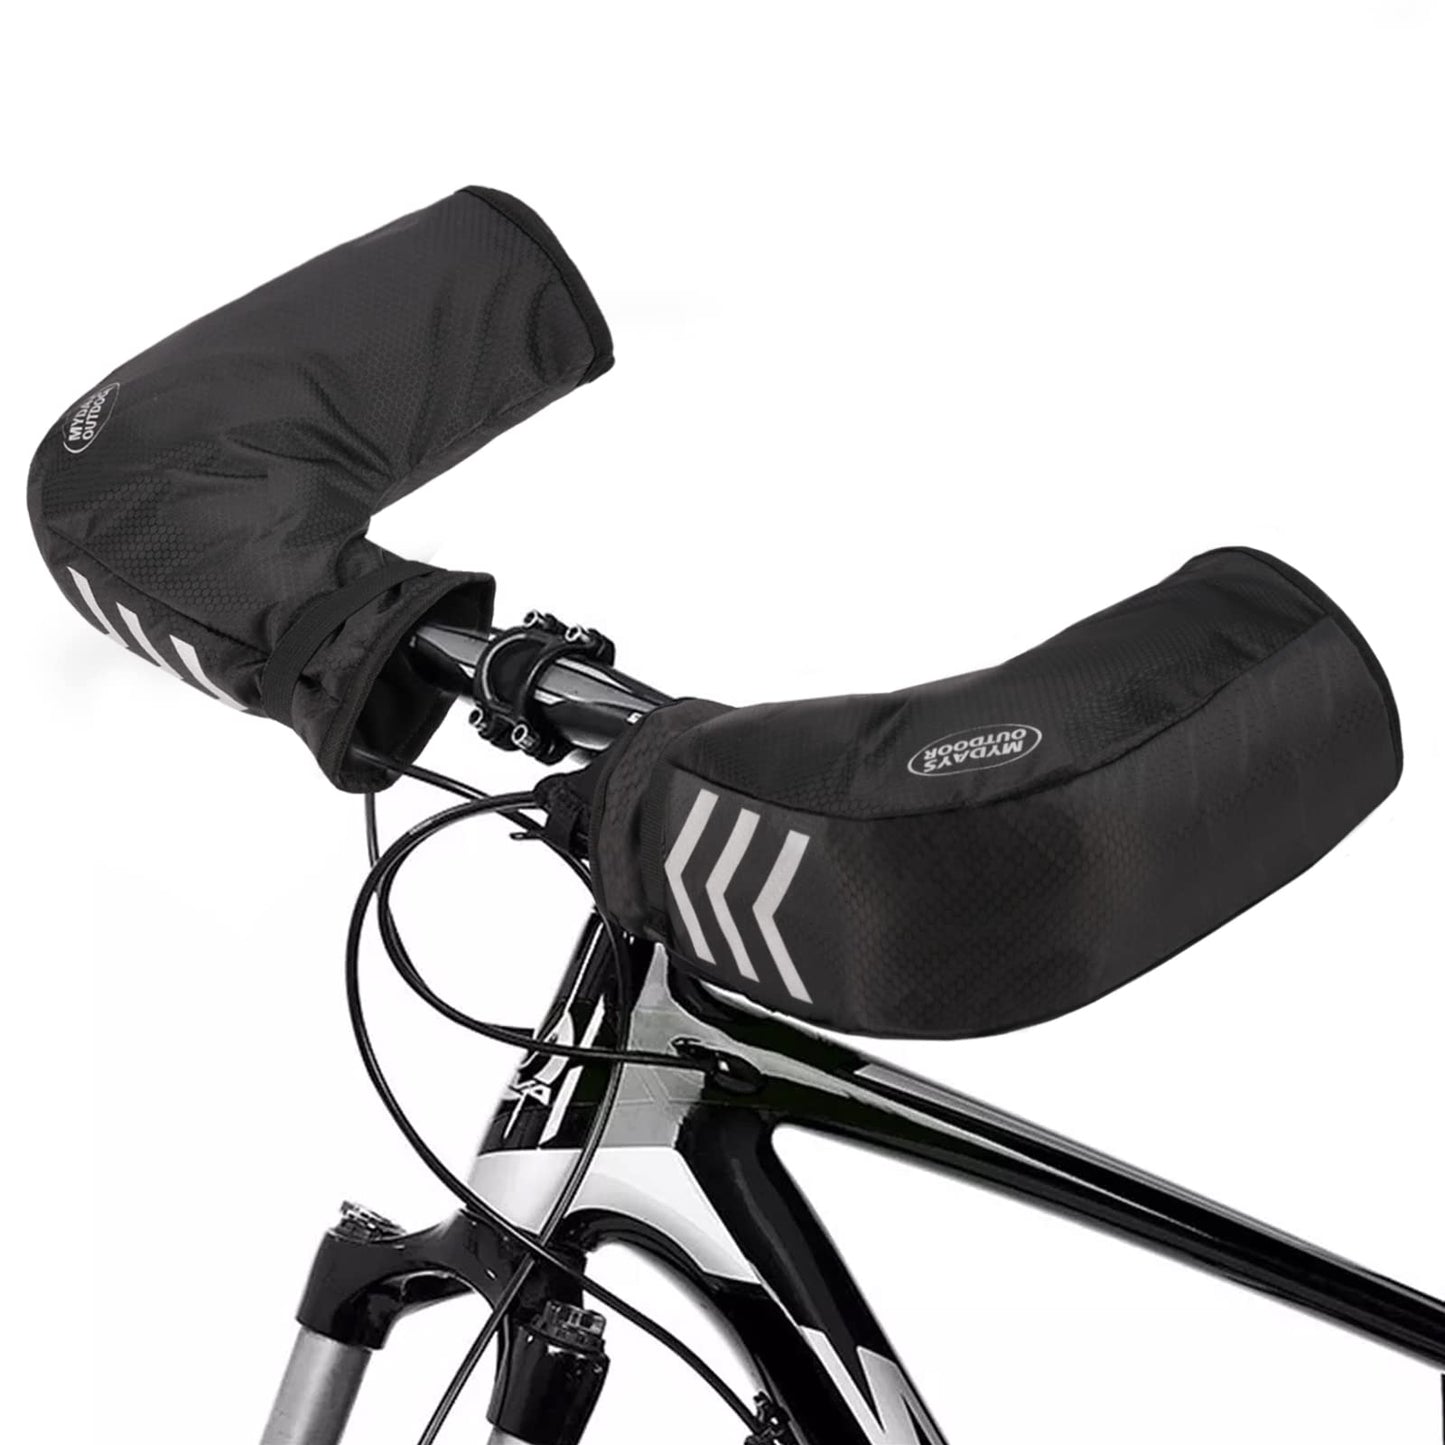 Bike Handlebar Muffs For Winter Weather Protection